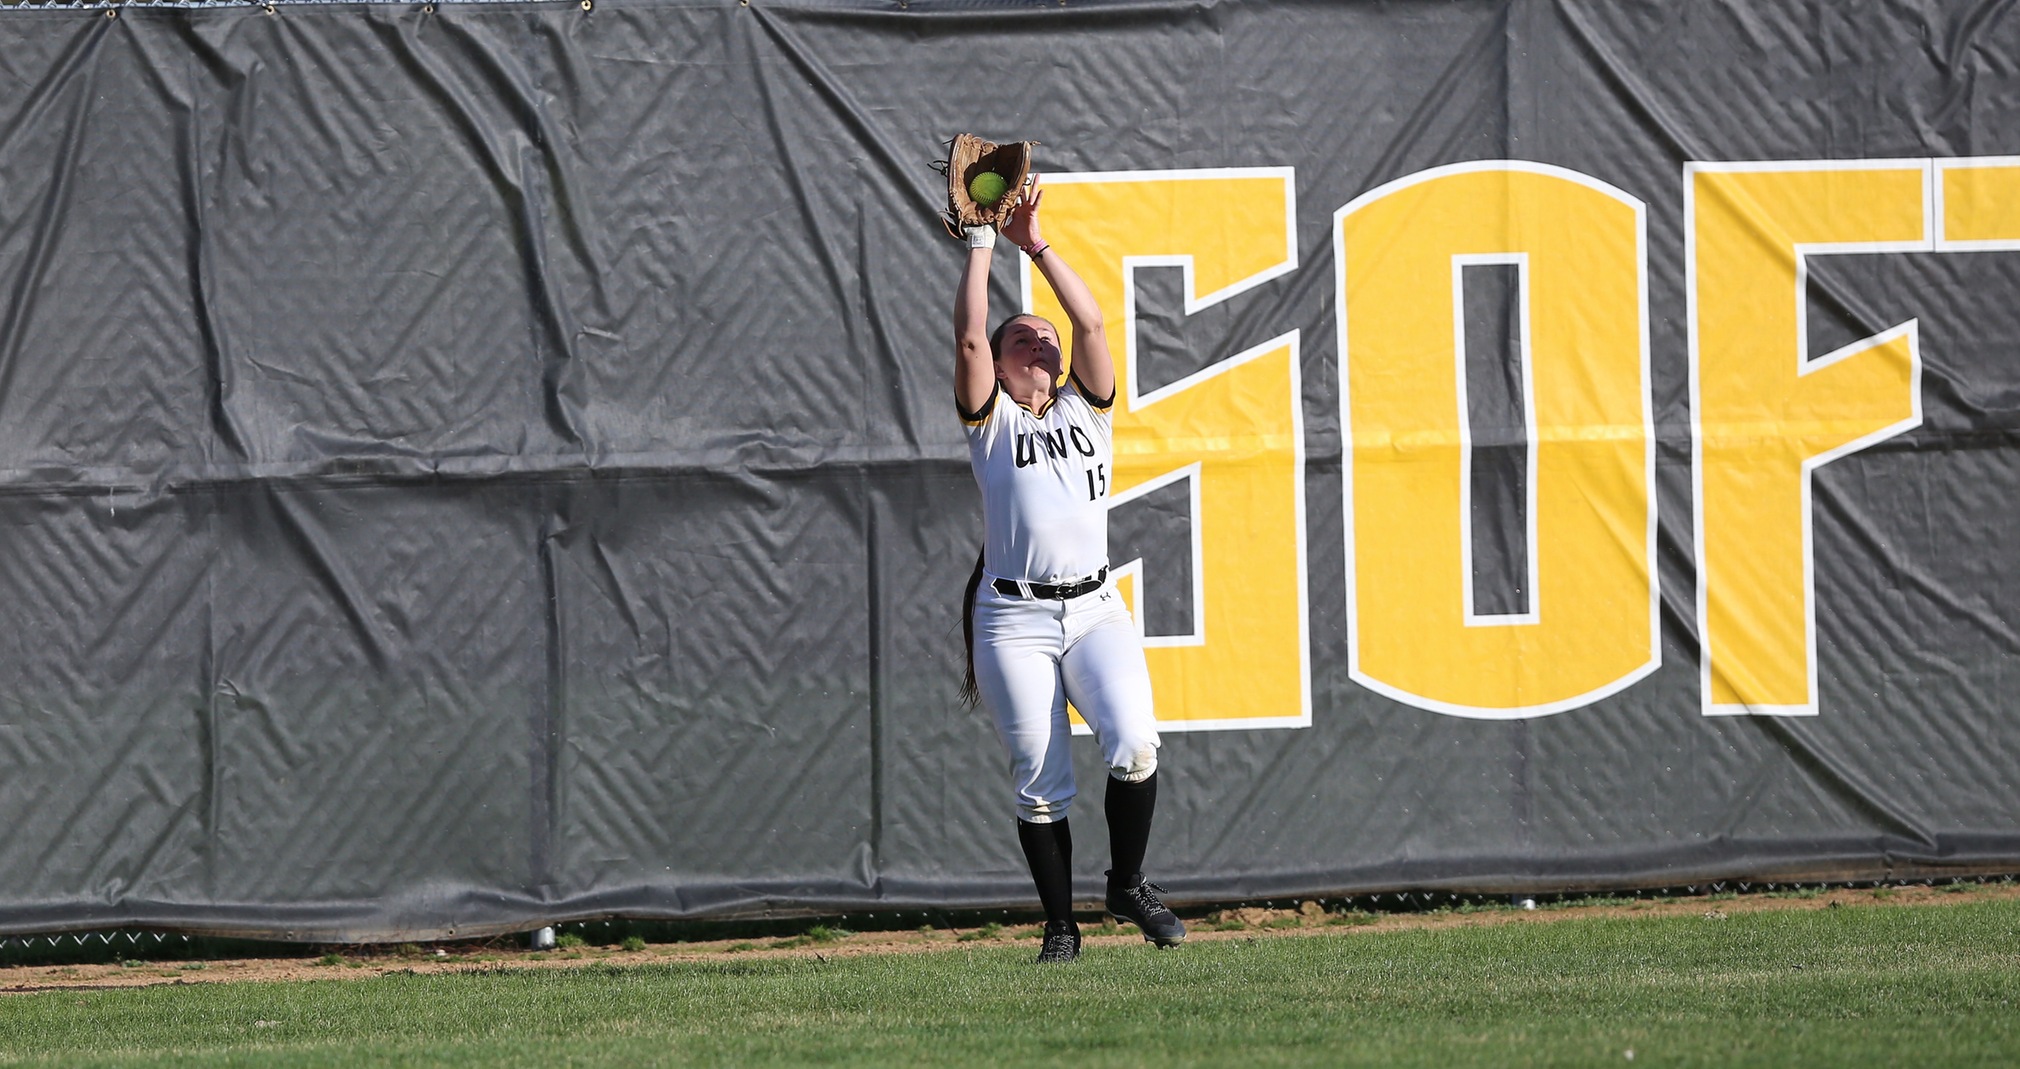 Acacia Tupa hit two home runs and recorded three putouts against the Blugolds.